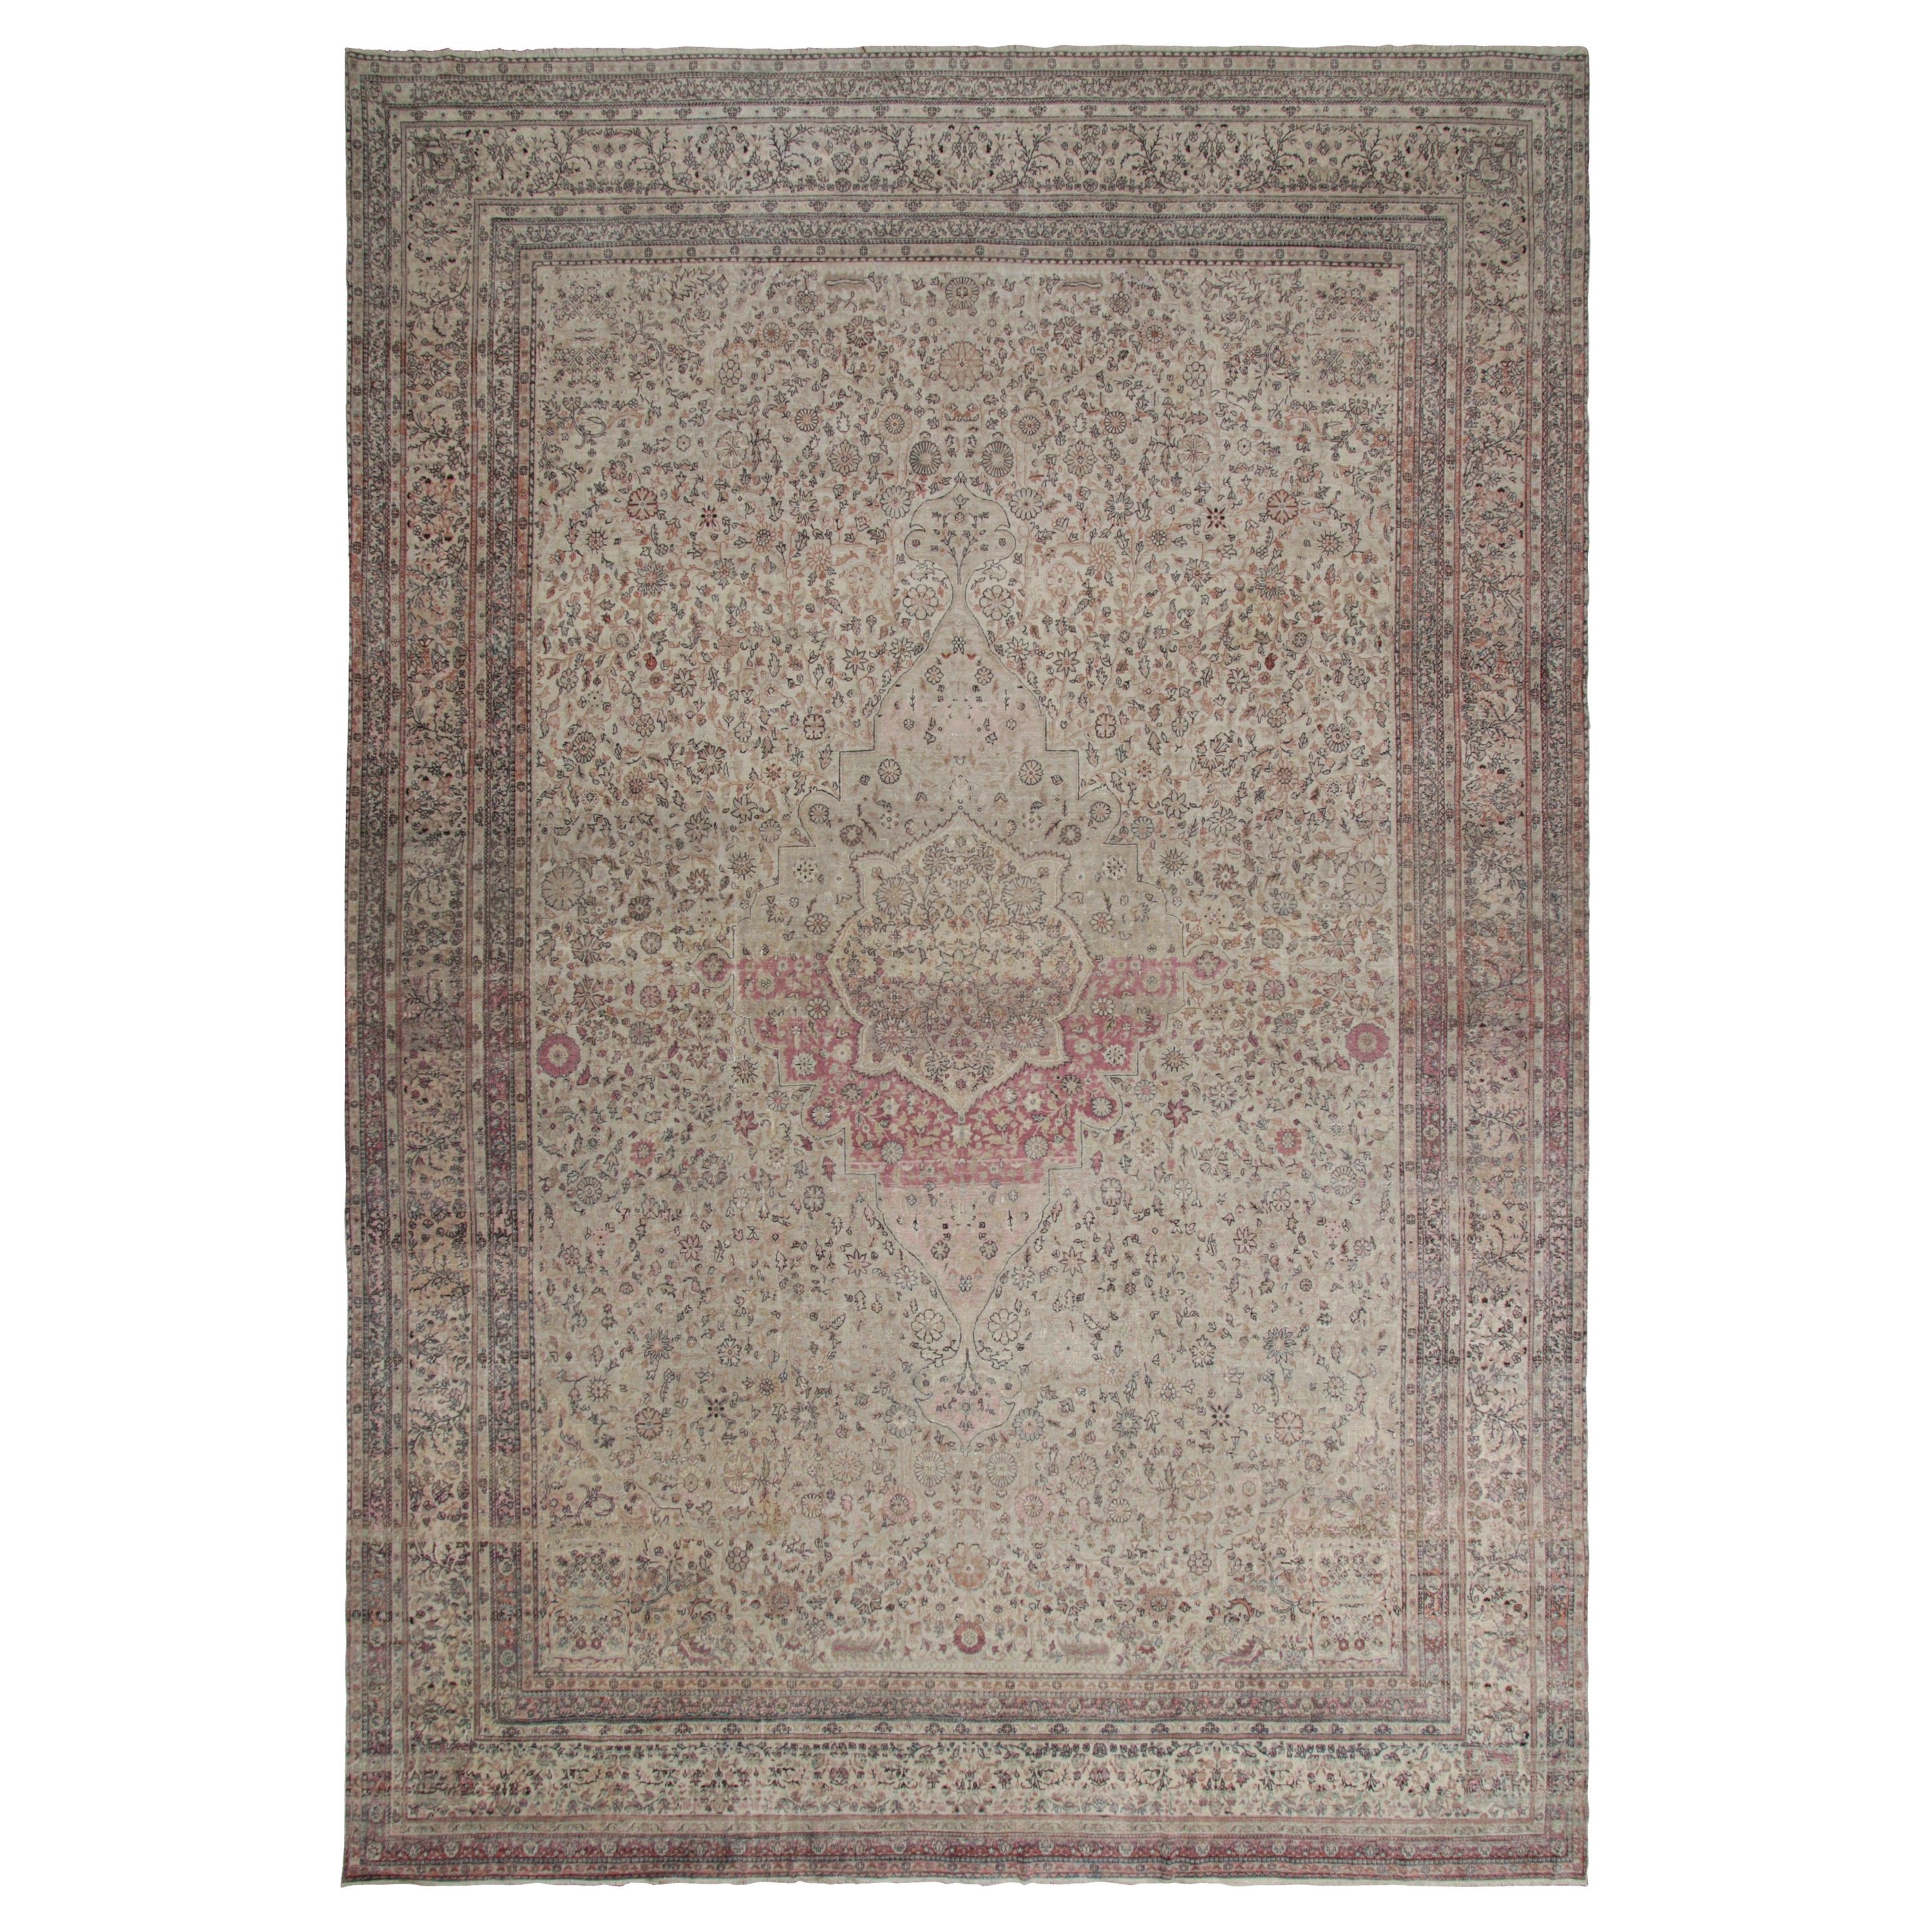 Oversized Antique Sivas Rug in Beige and Red Floral Patterns, from Rug & Kilim For Sale